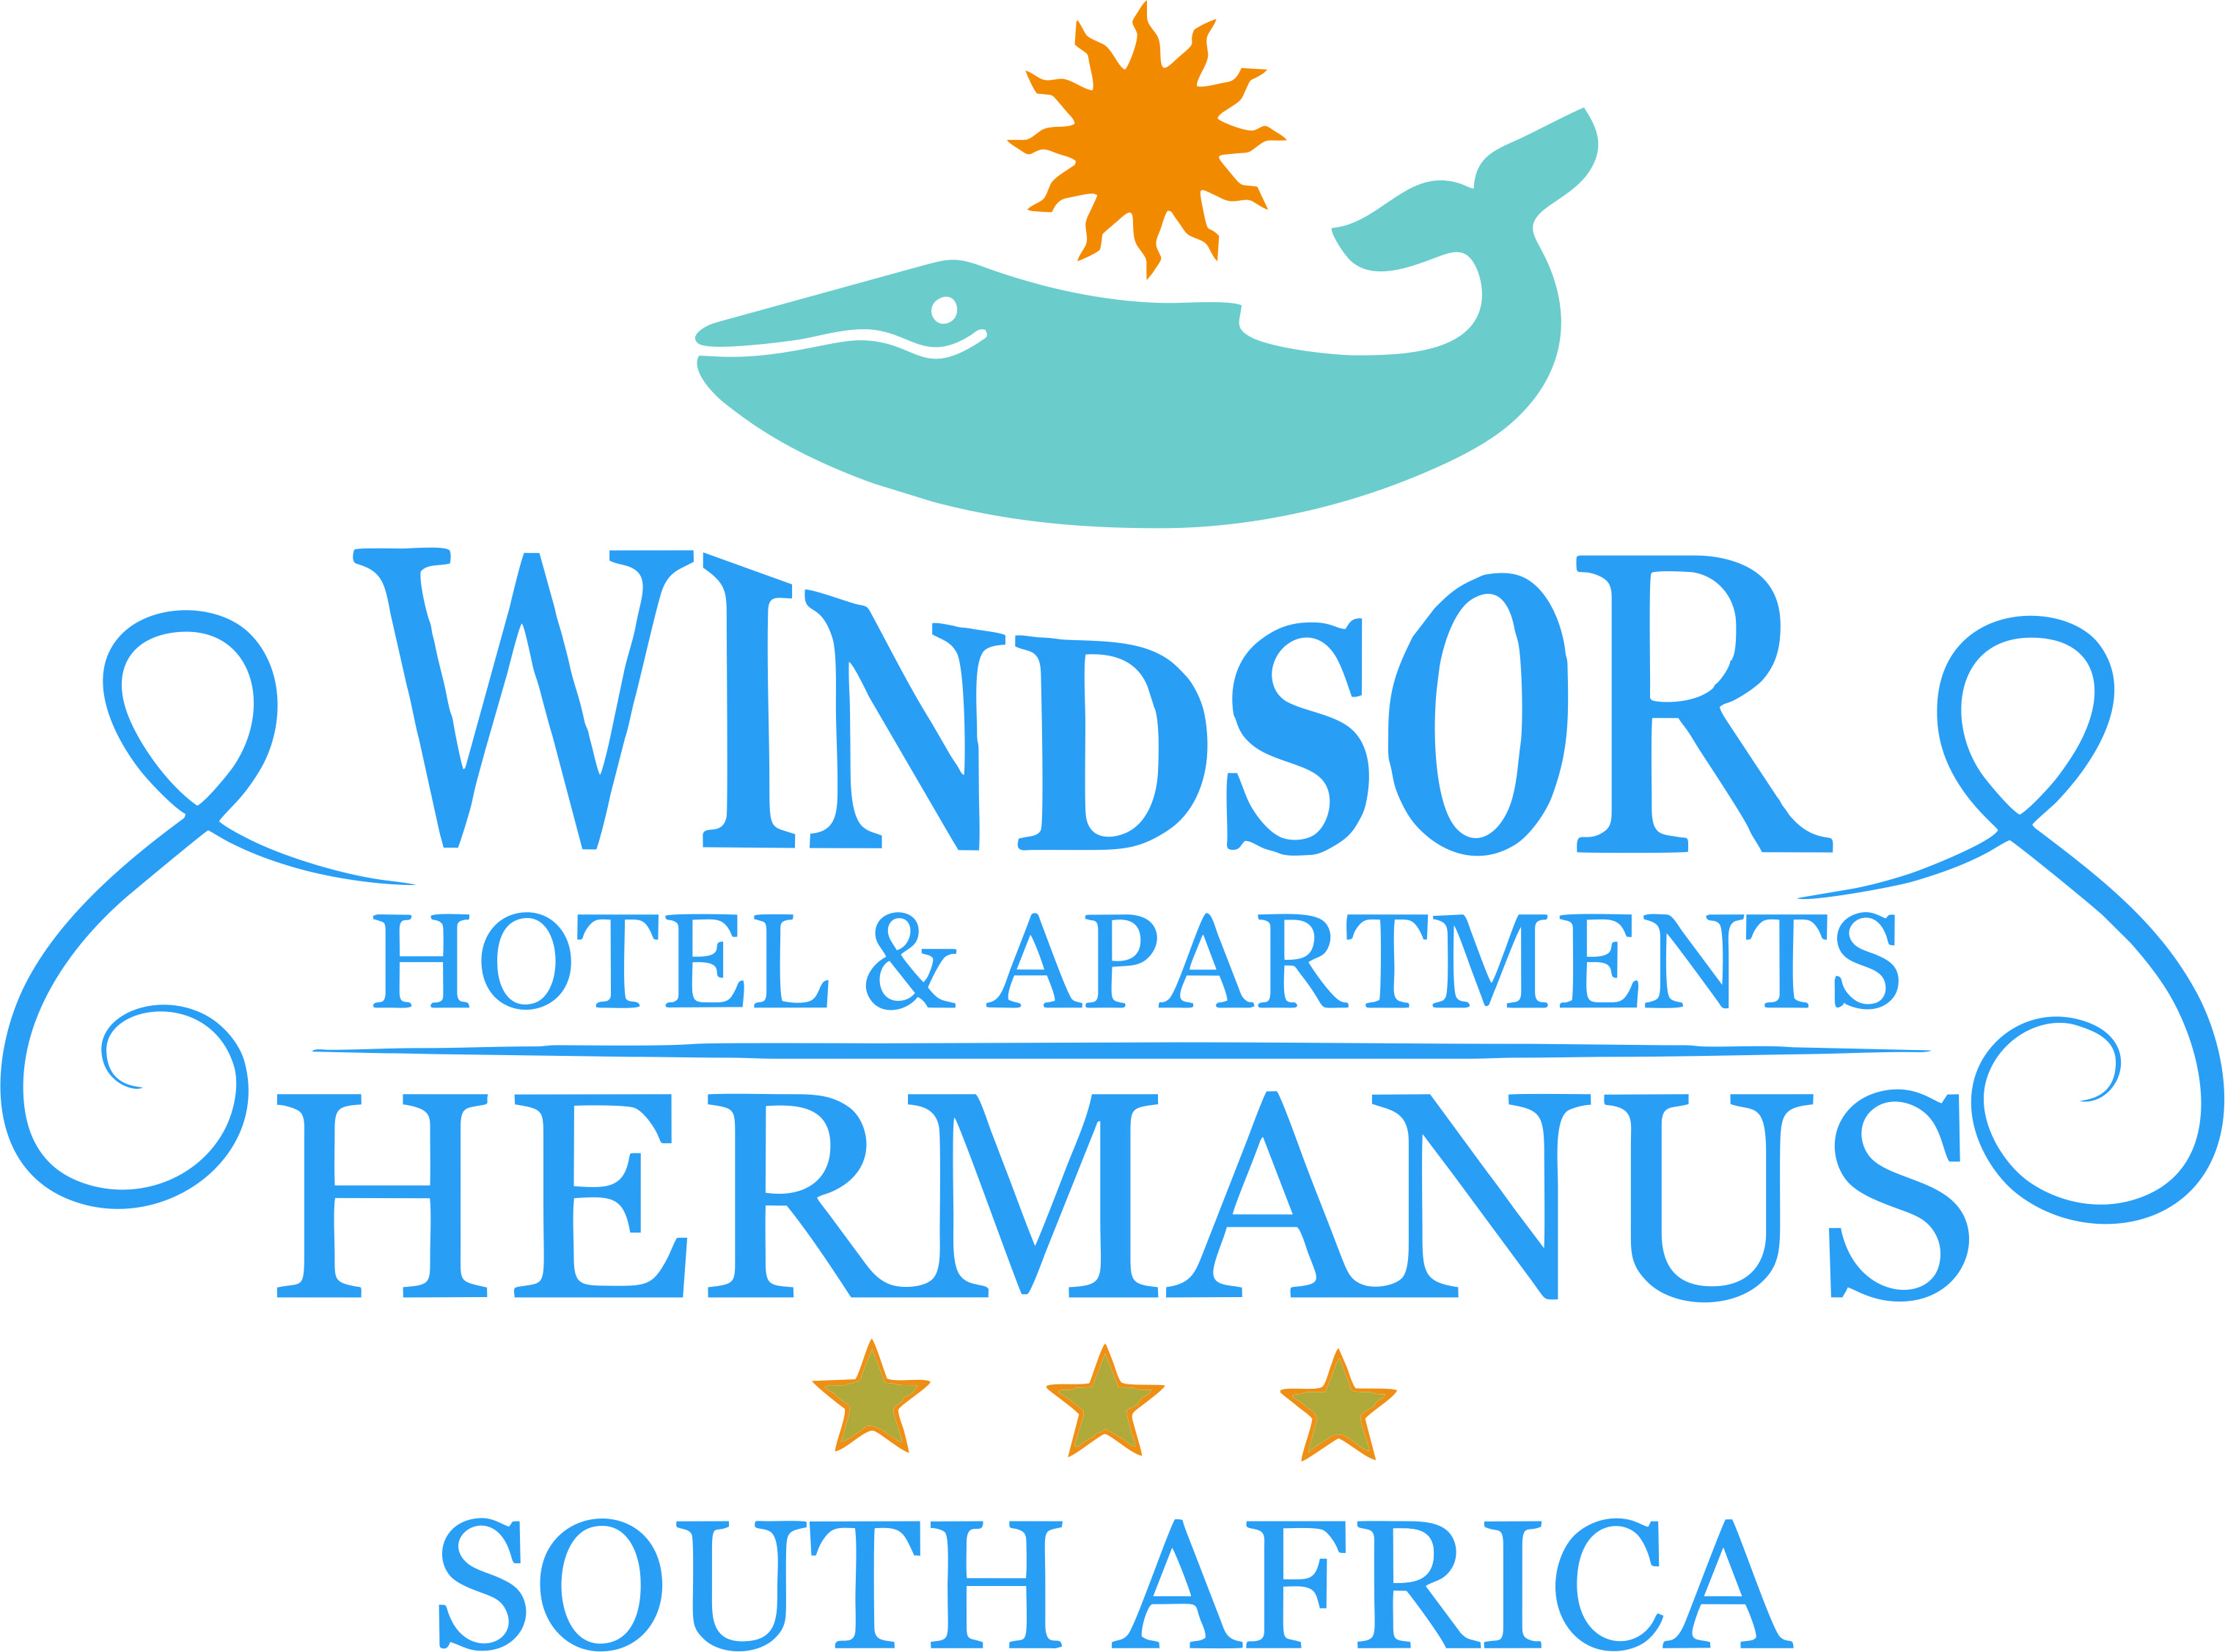 History of the Windsor Hotel